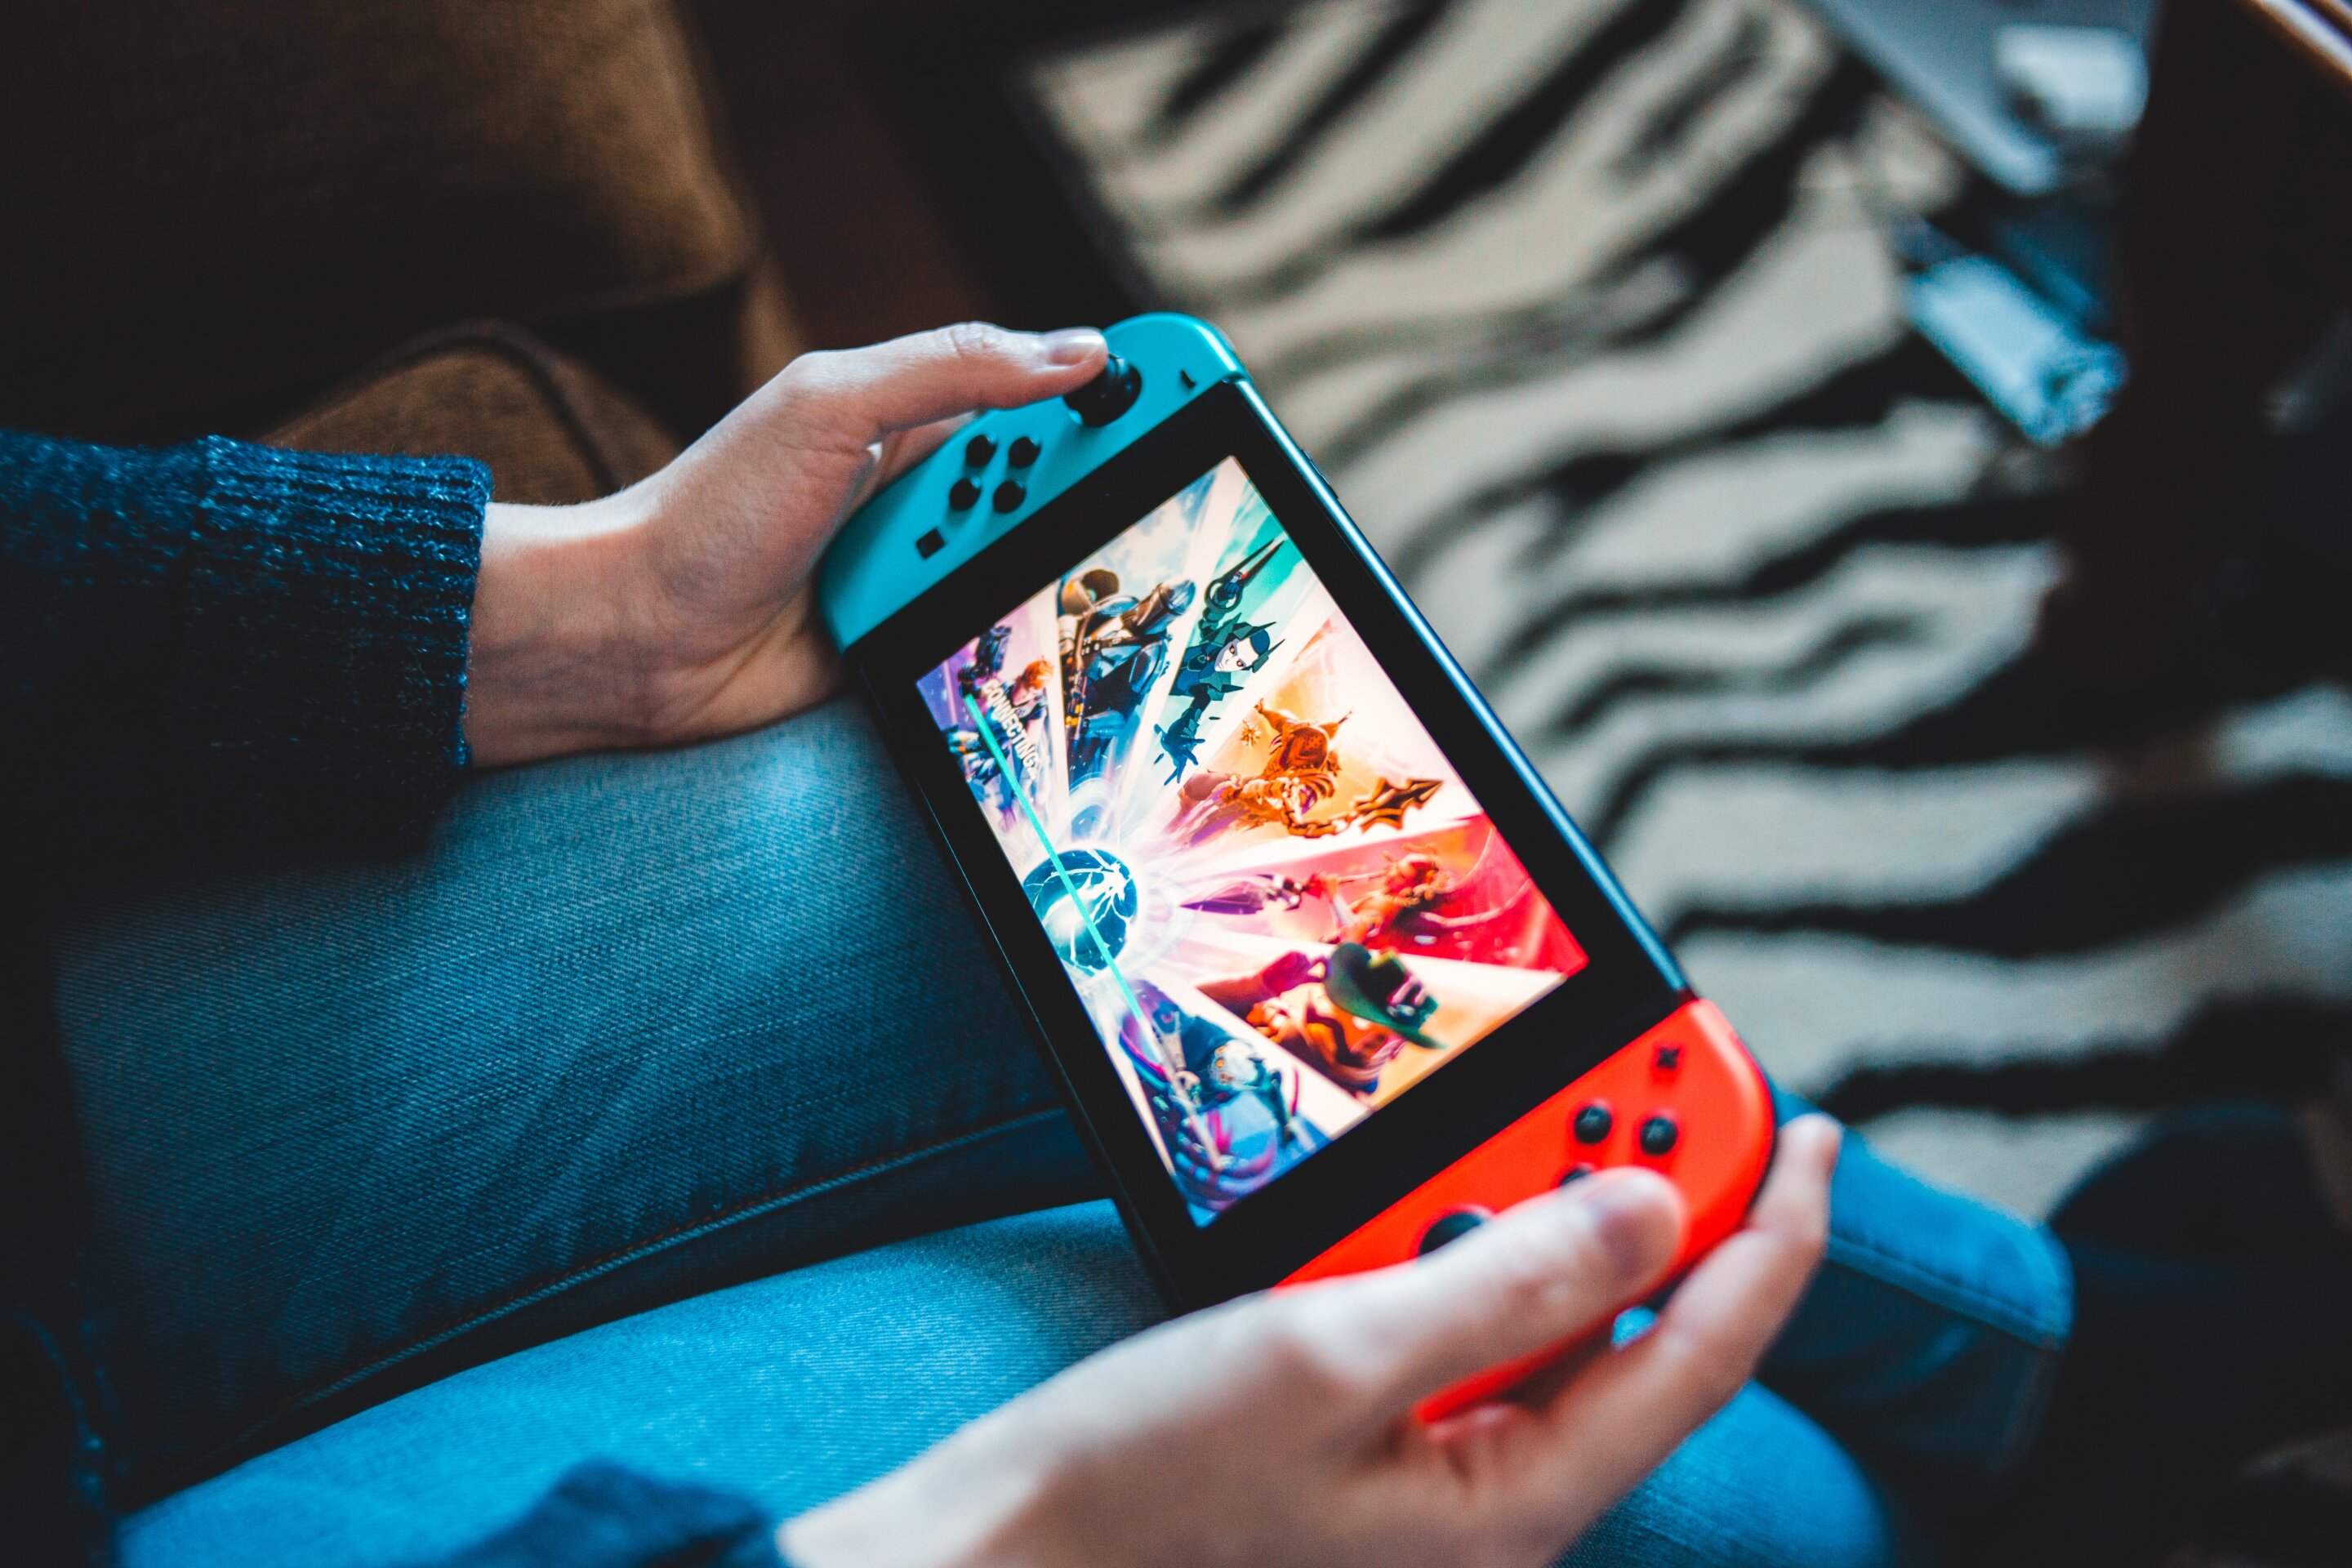 Game on Mom and Dad: Researchers call on parents to discuss their video game use